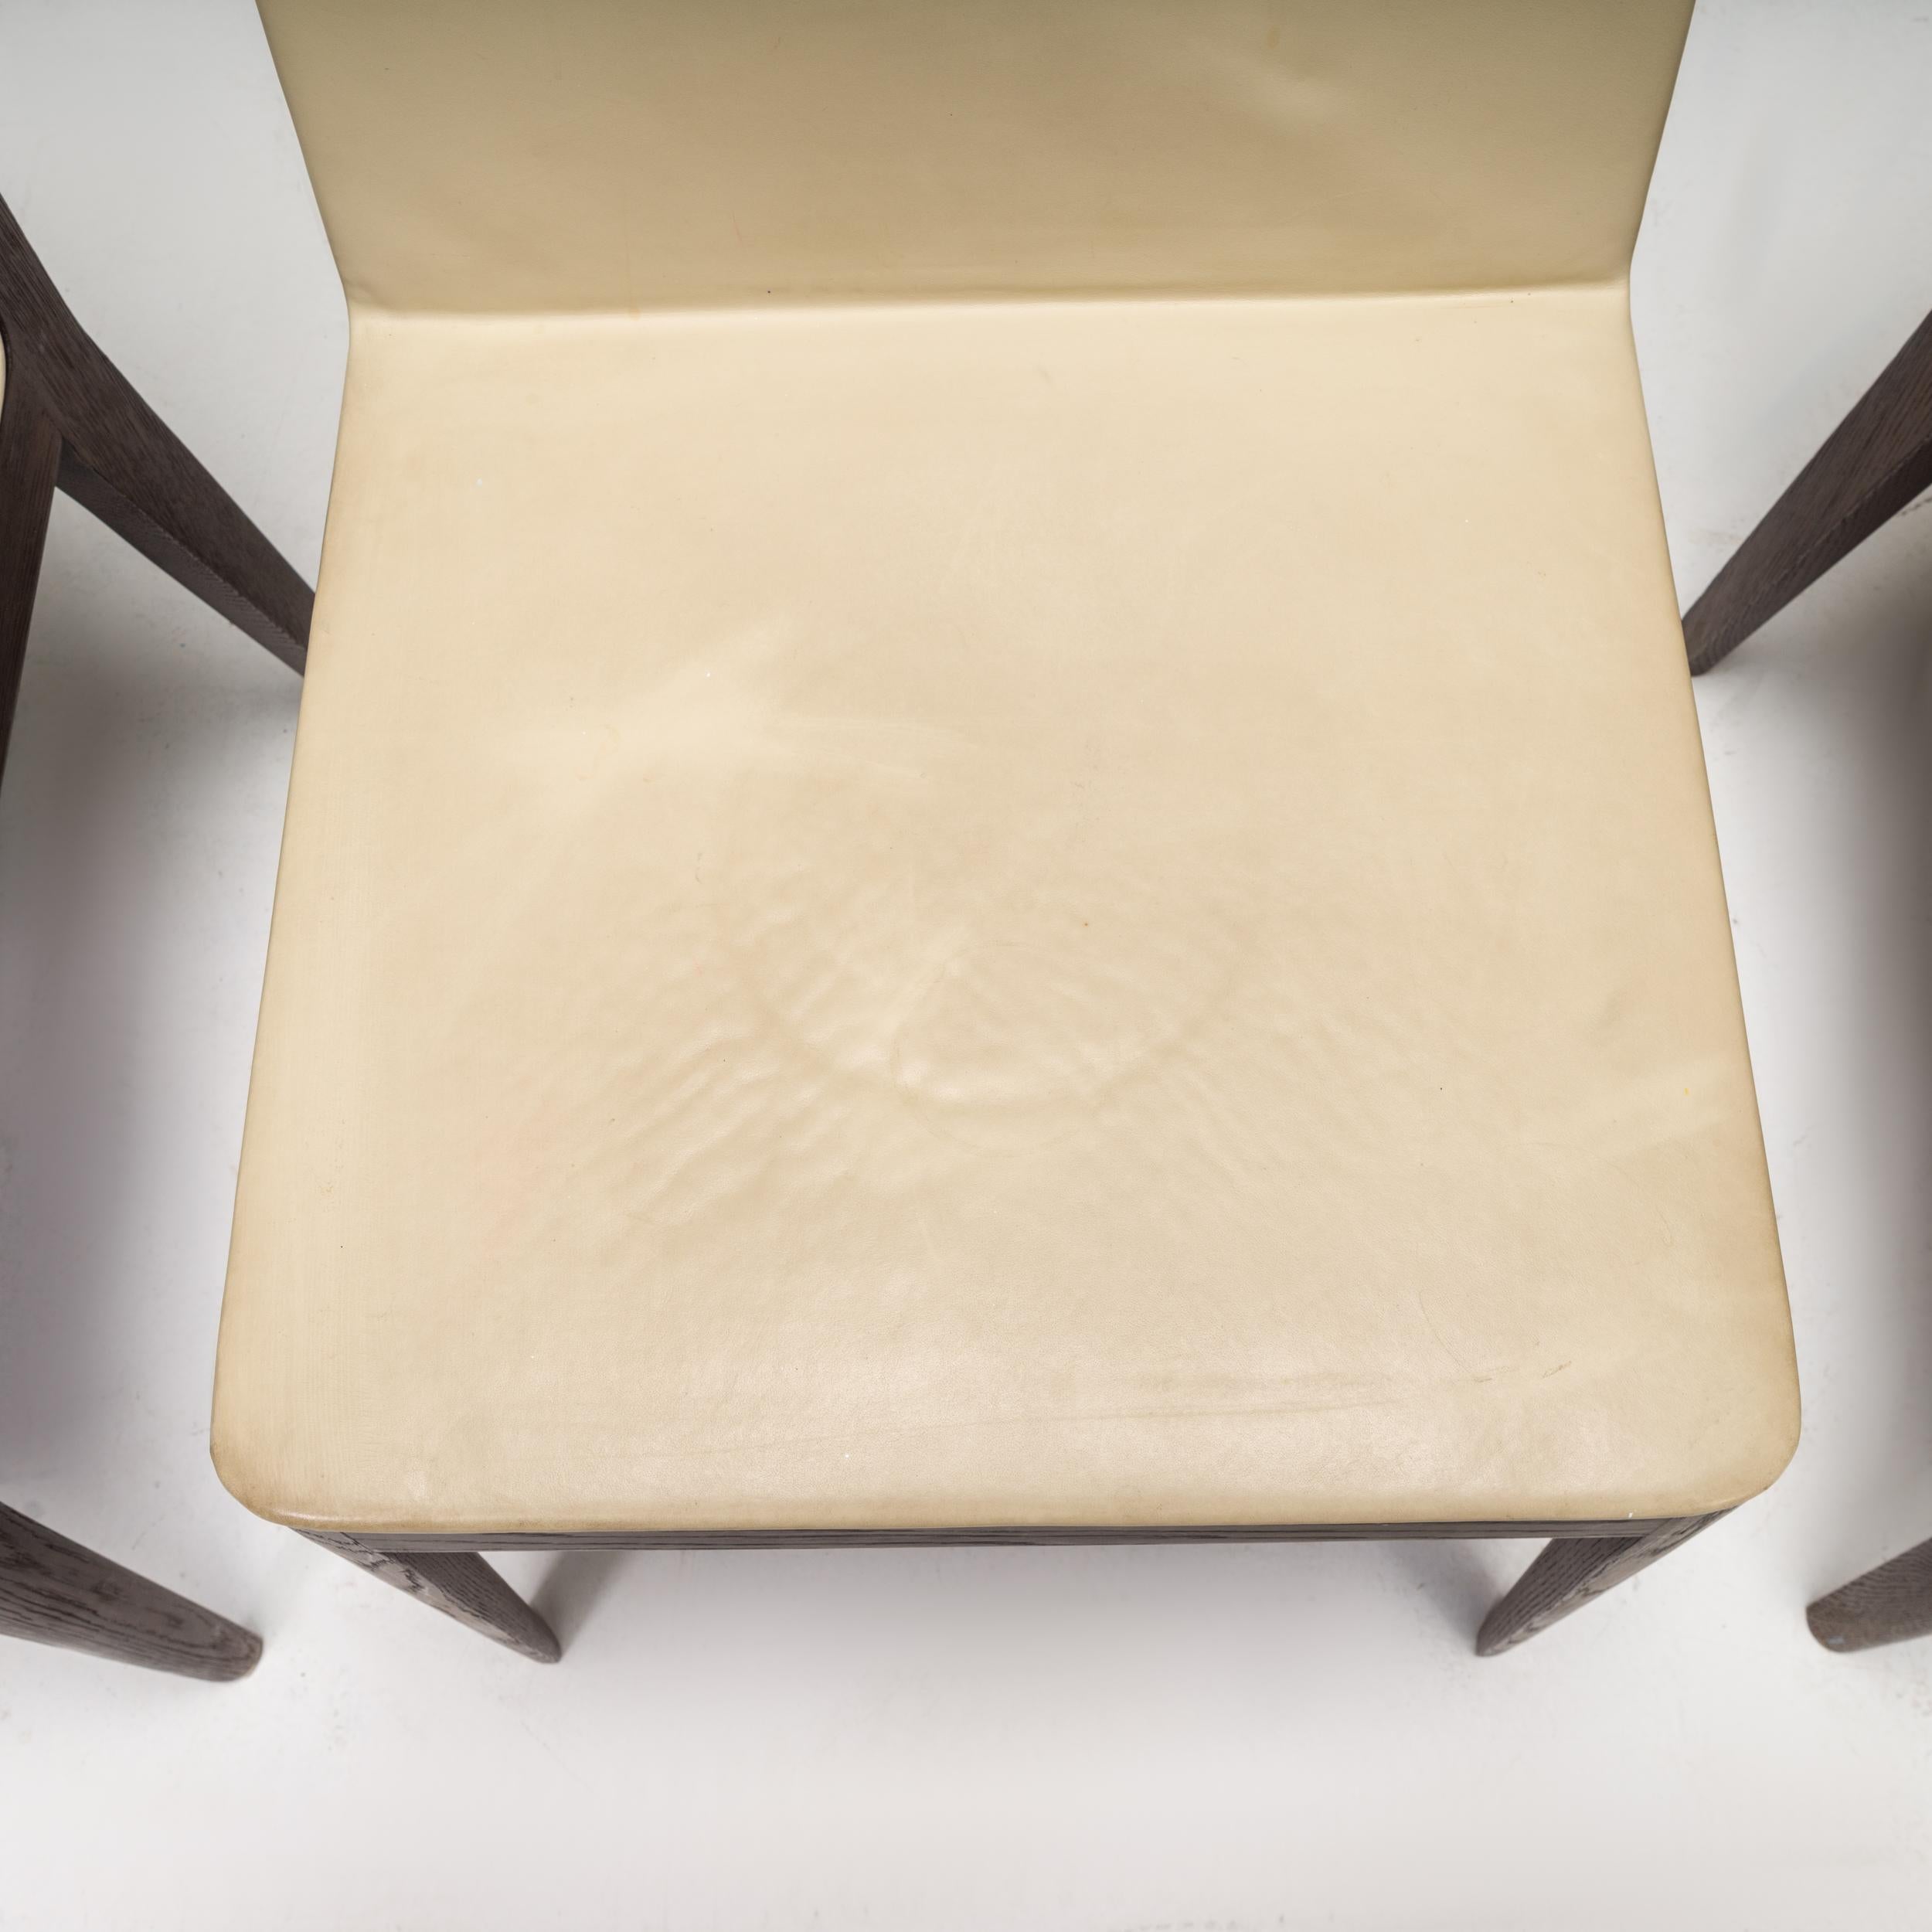 B&B Italia by Antonio Citterio Beige Leather & Walnut EL Dining Chairs, Set of 4 For Sale 8